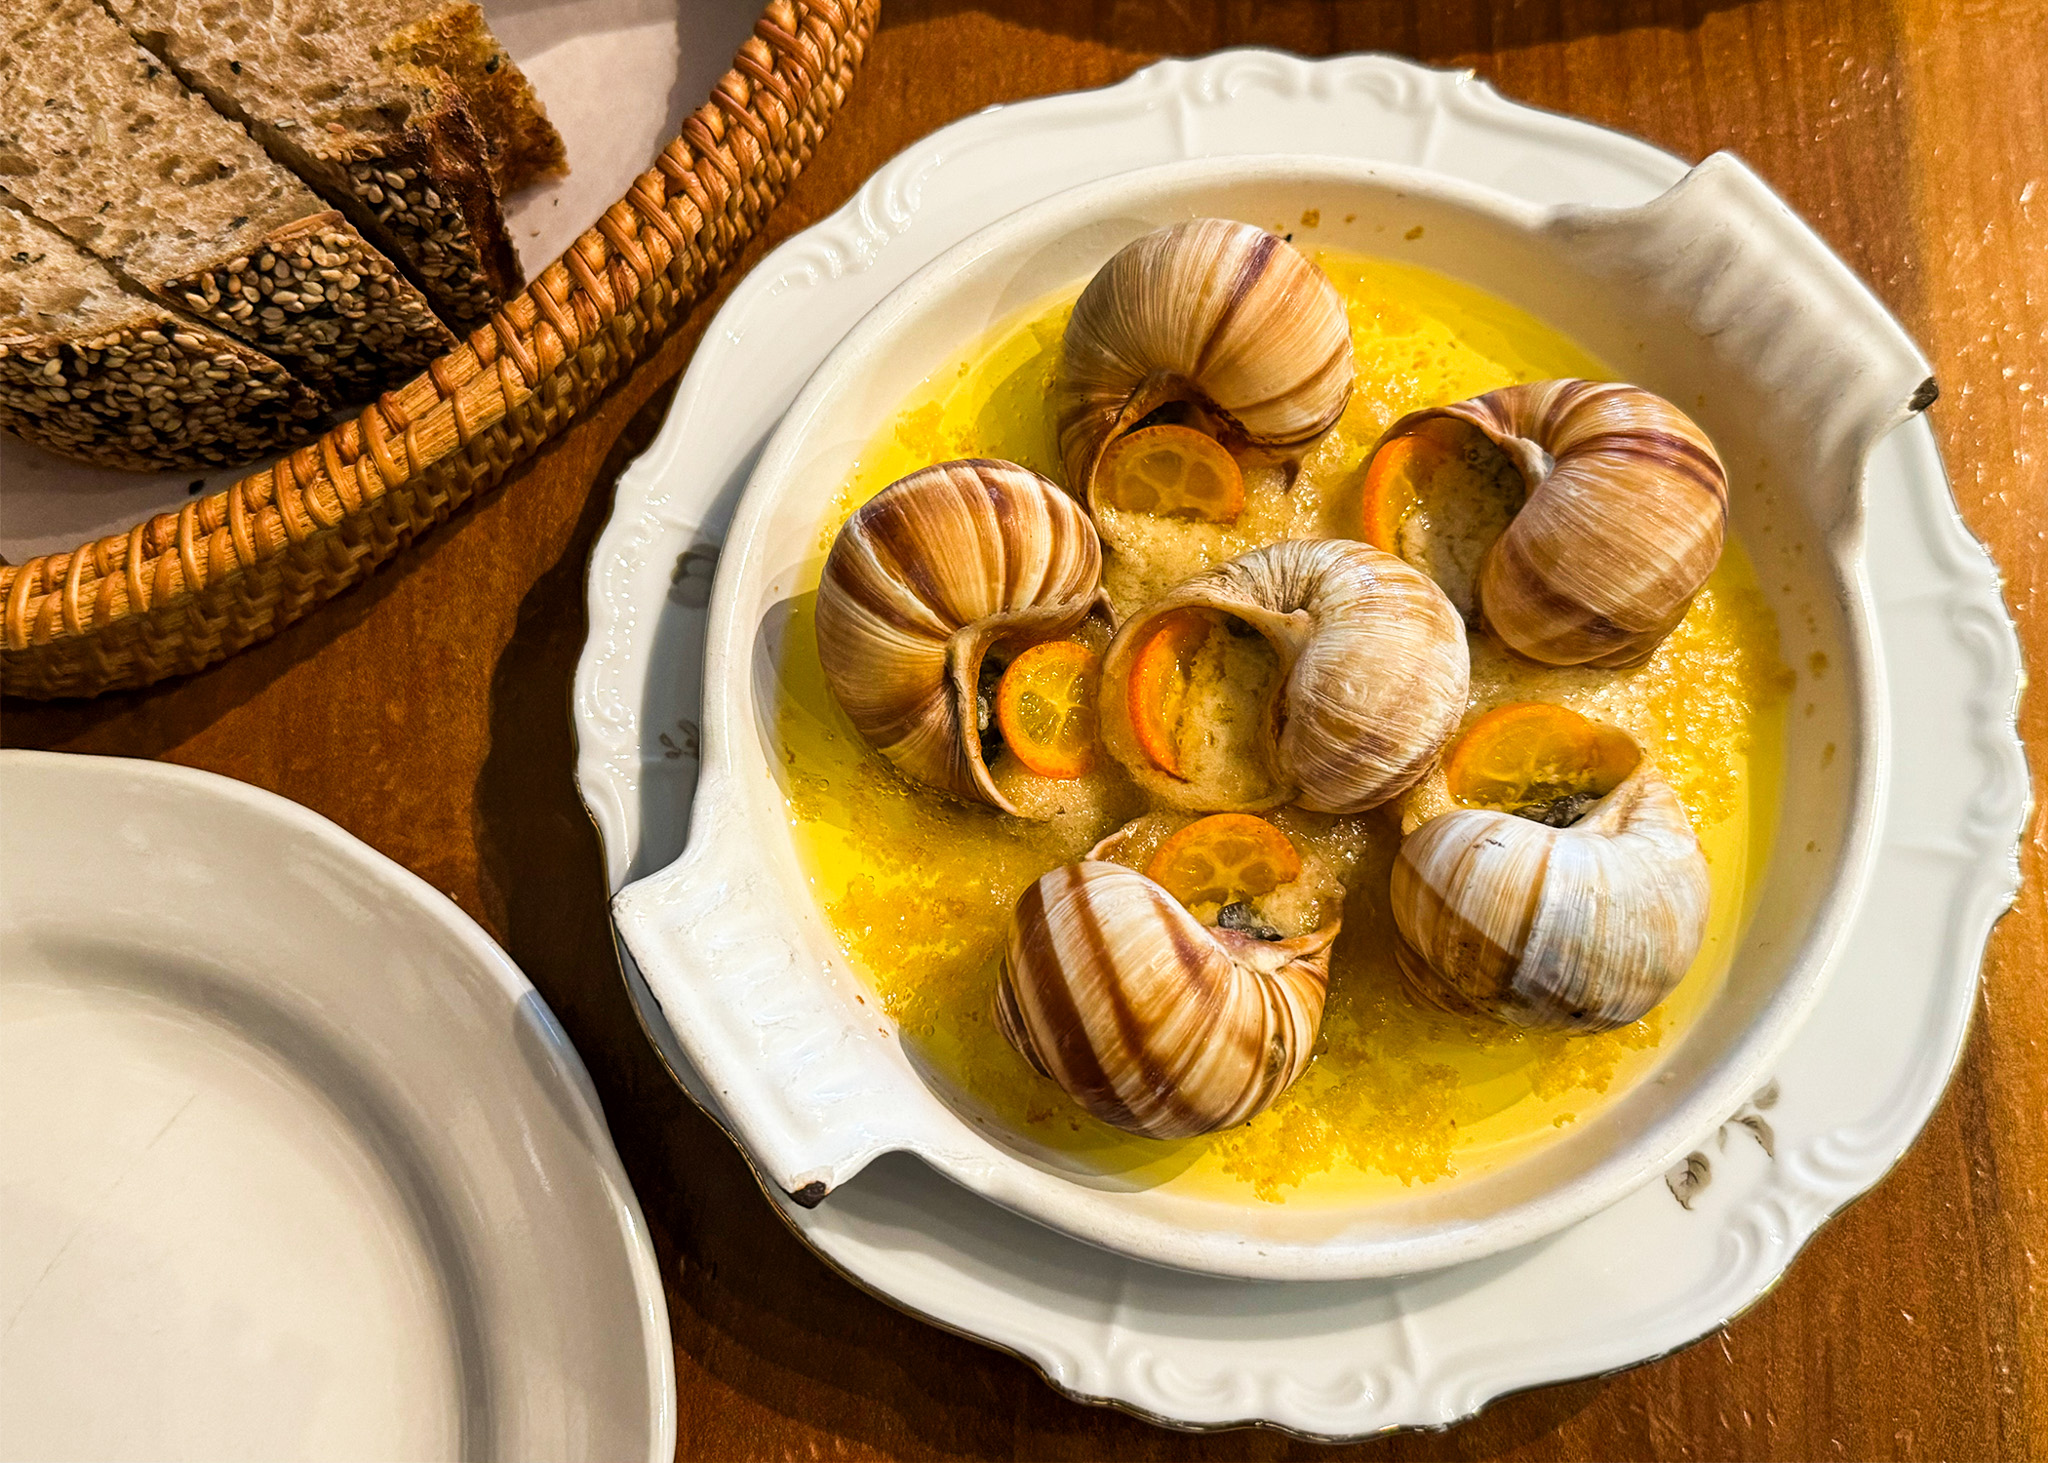 A plate of escargot with garlic butter, slices of rustic bread, and an empty plate on a wooden table.